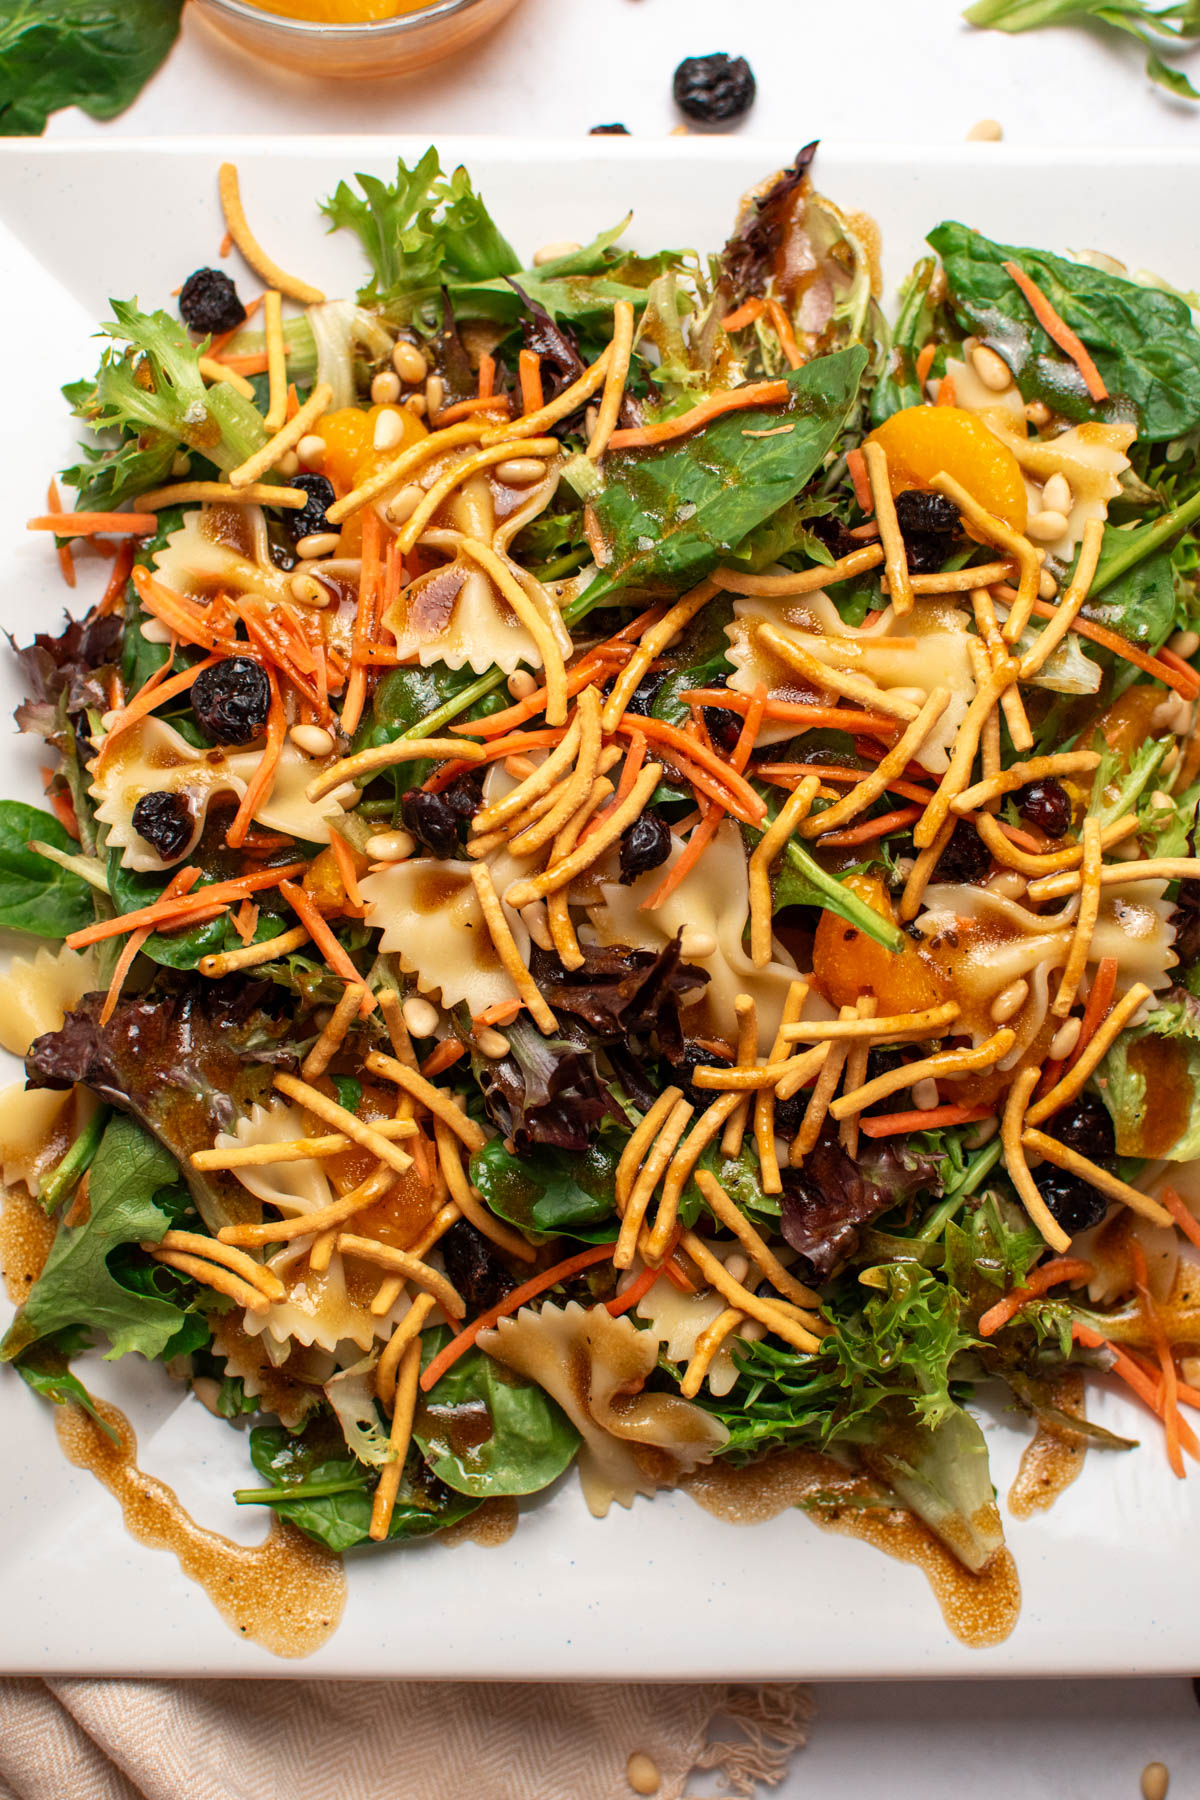 Asian bowtie pasta salad with spinach, chow mein noodles, oranges, and carrots.